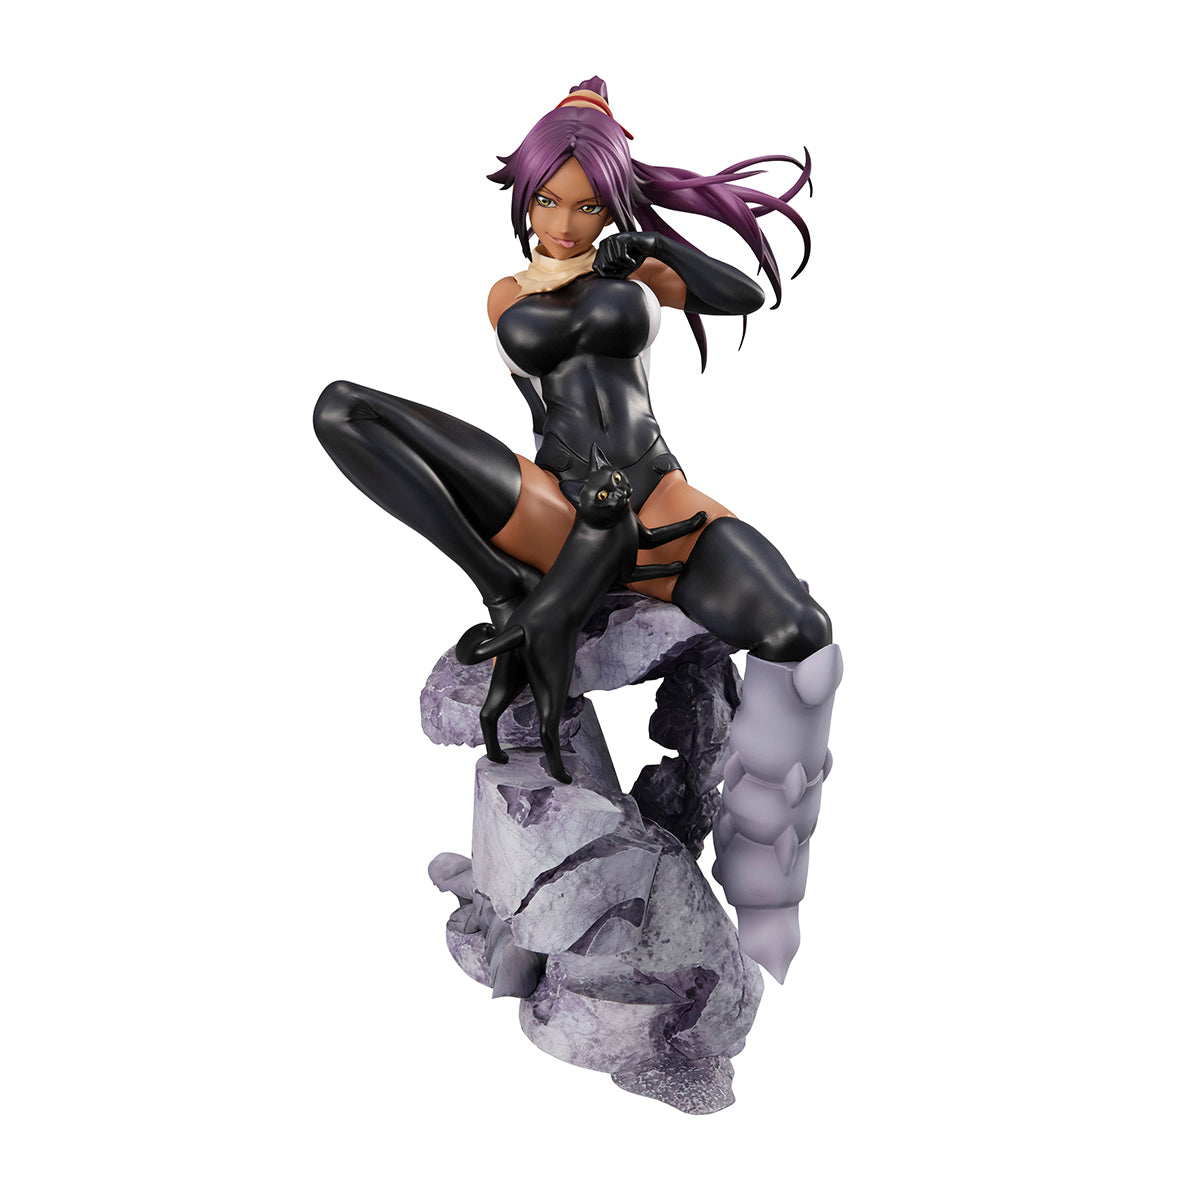 Bleach - Shihouin Yoruichi - G.E.M. (MegaHouse), Release Date: 31. May 2021, Dimensions: 200 mm, Material: ABS, PVC, Nippon Figures